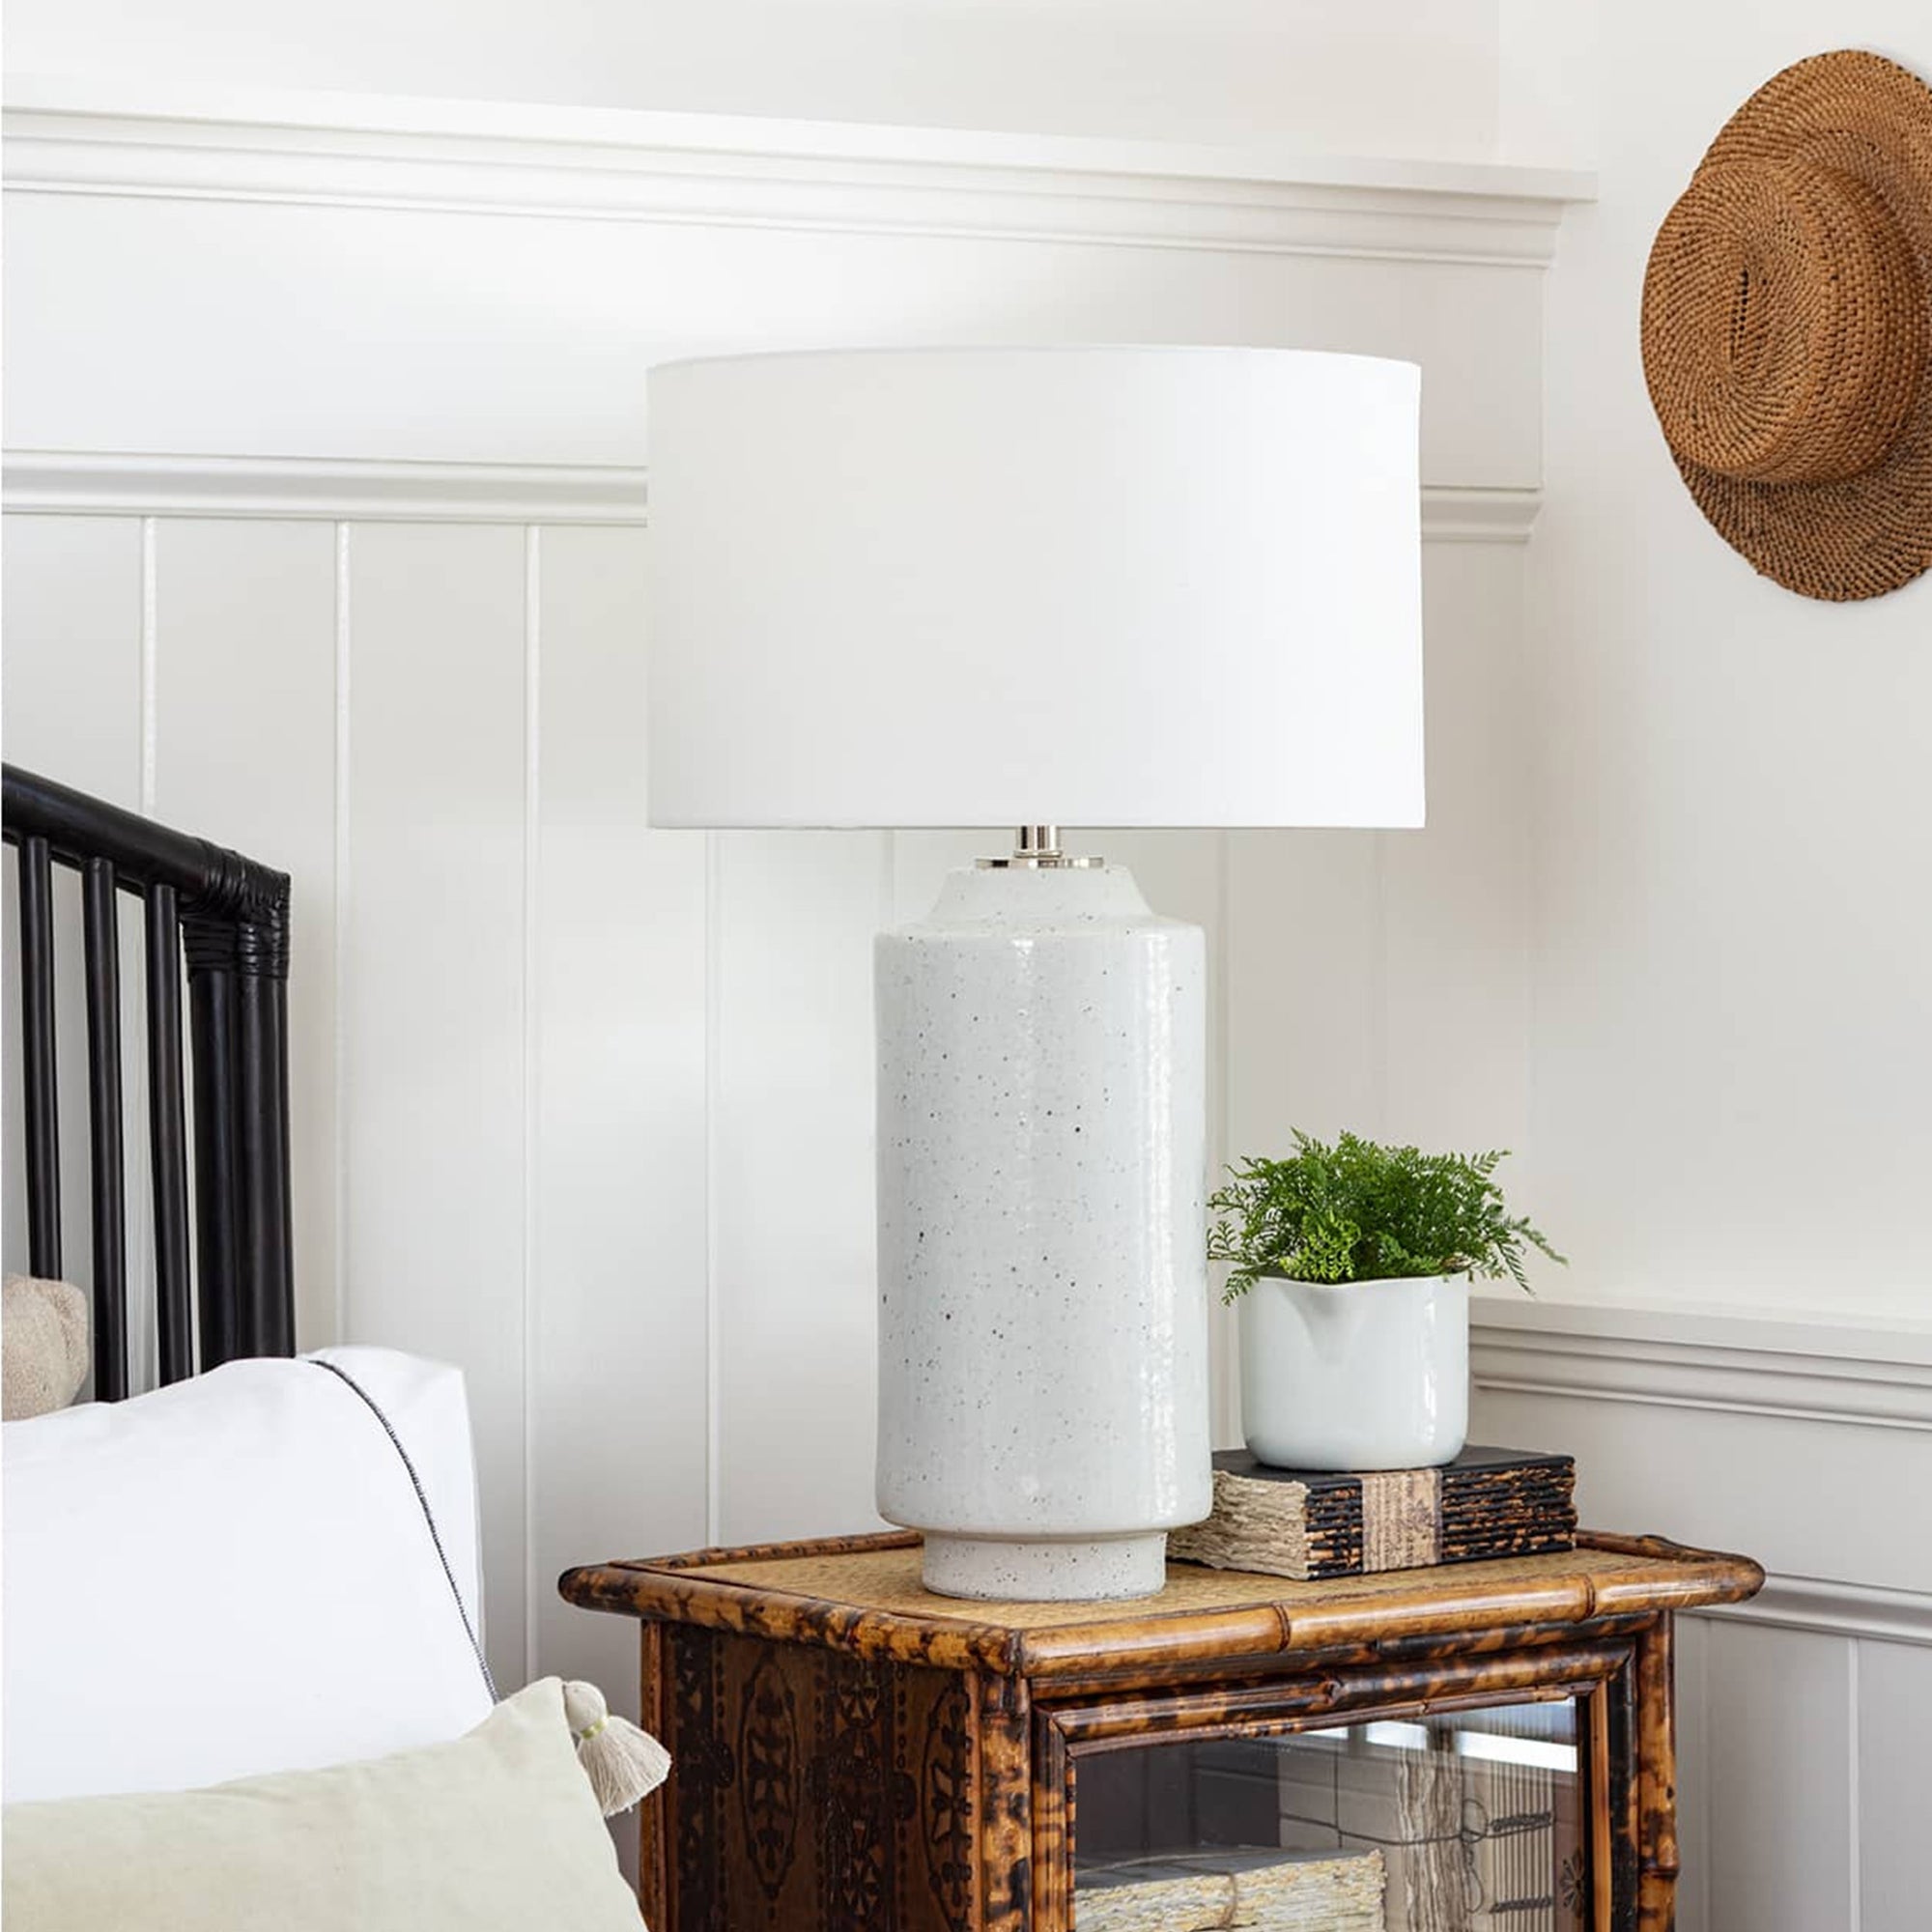 Markus Table Lamp by Southern Living